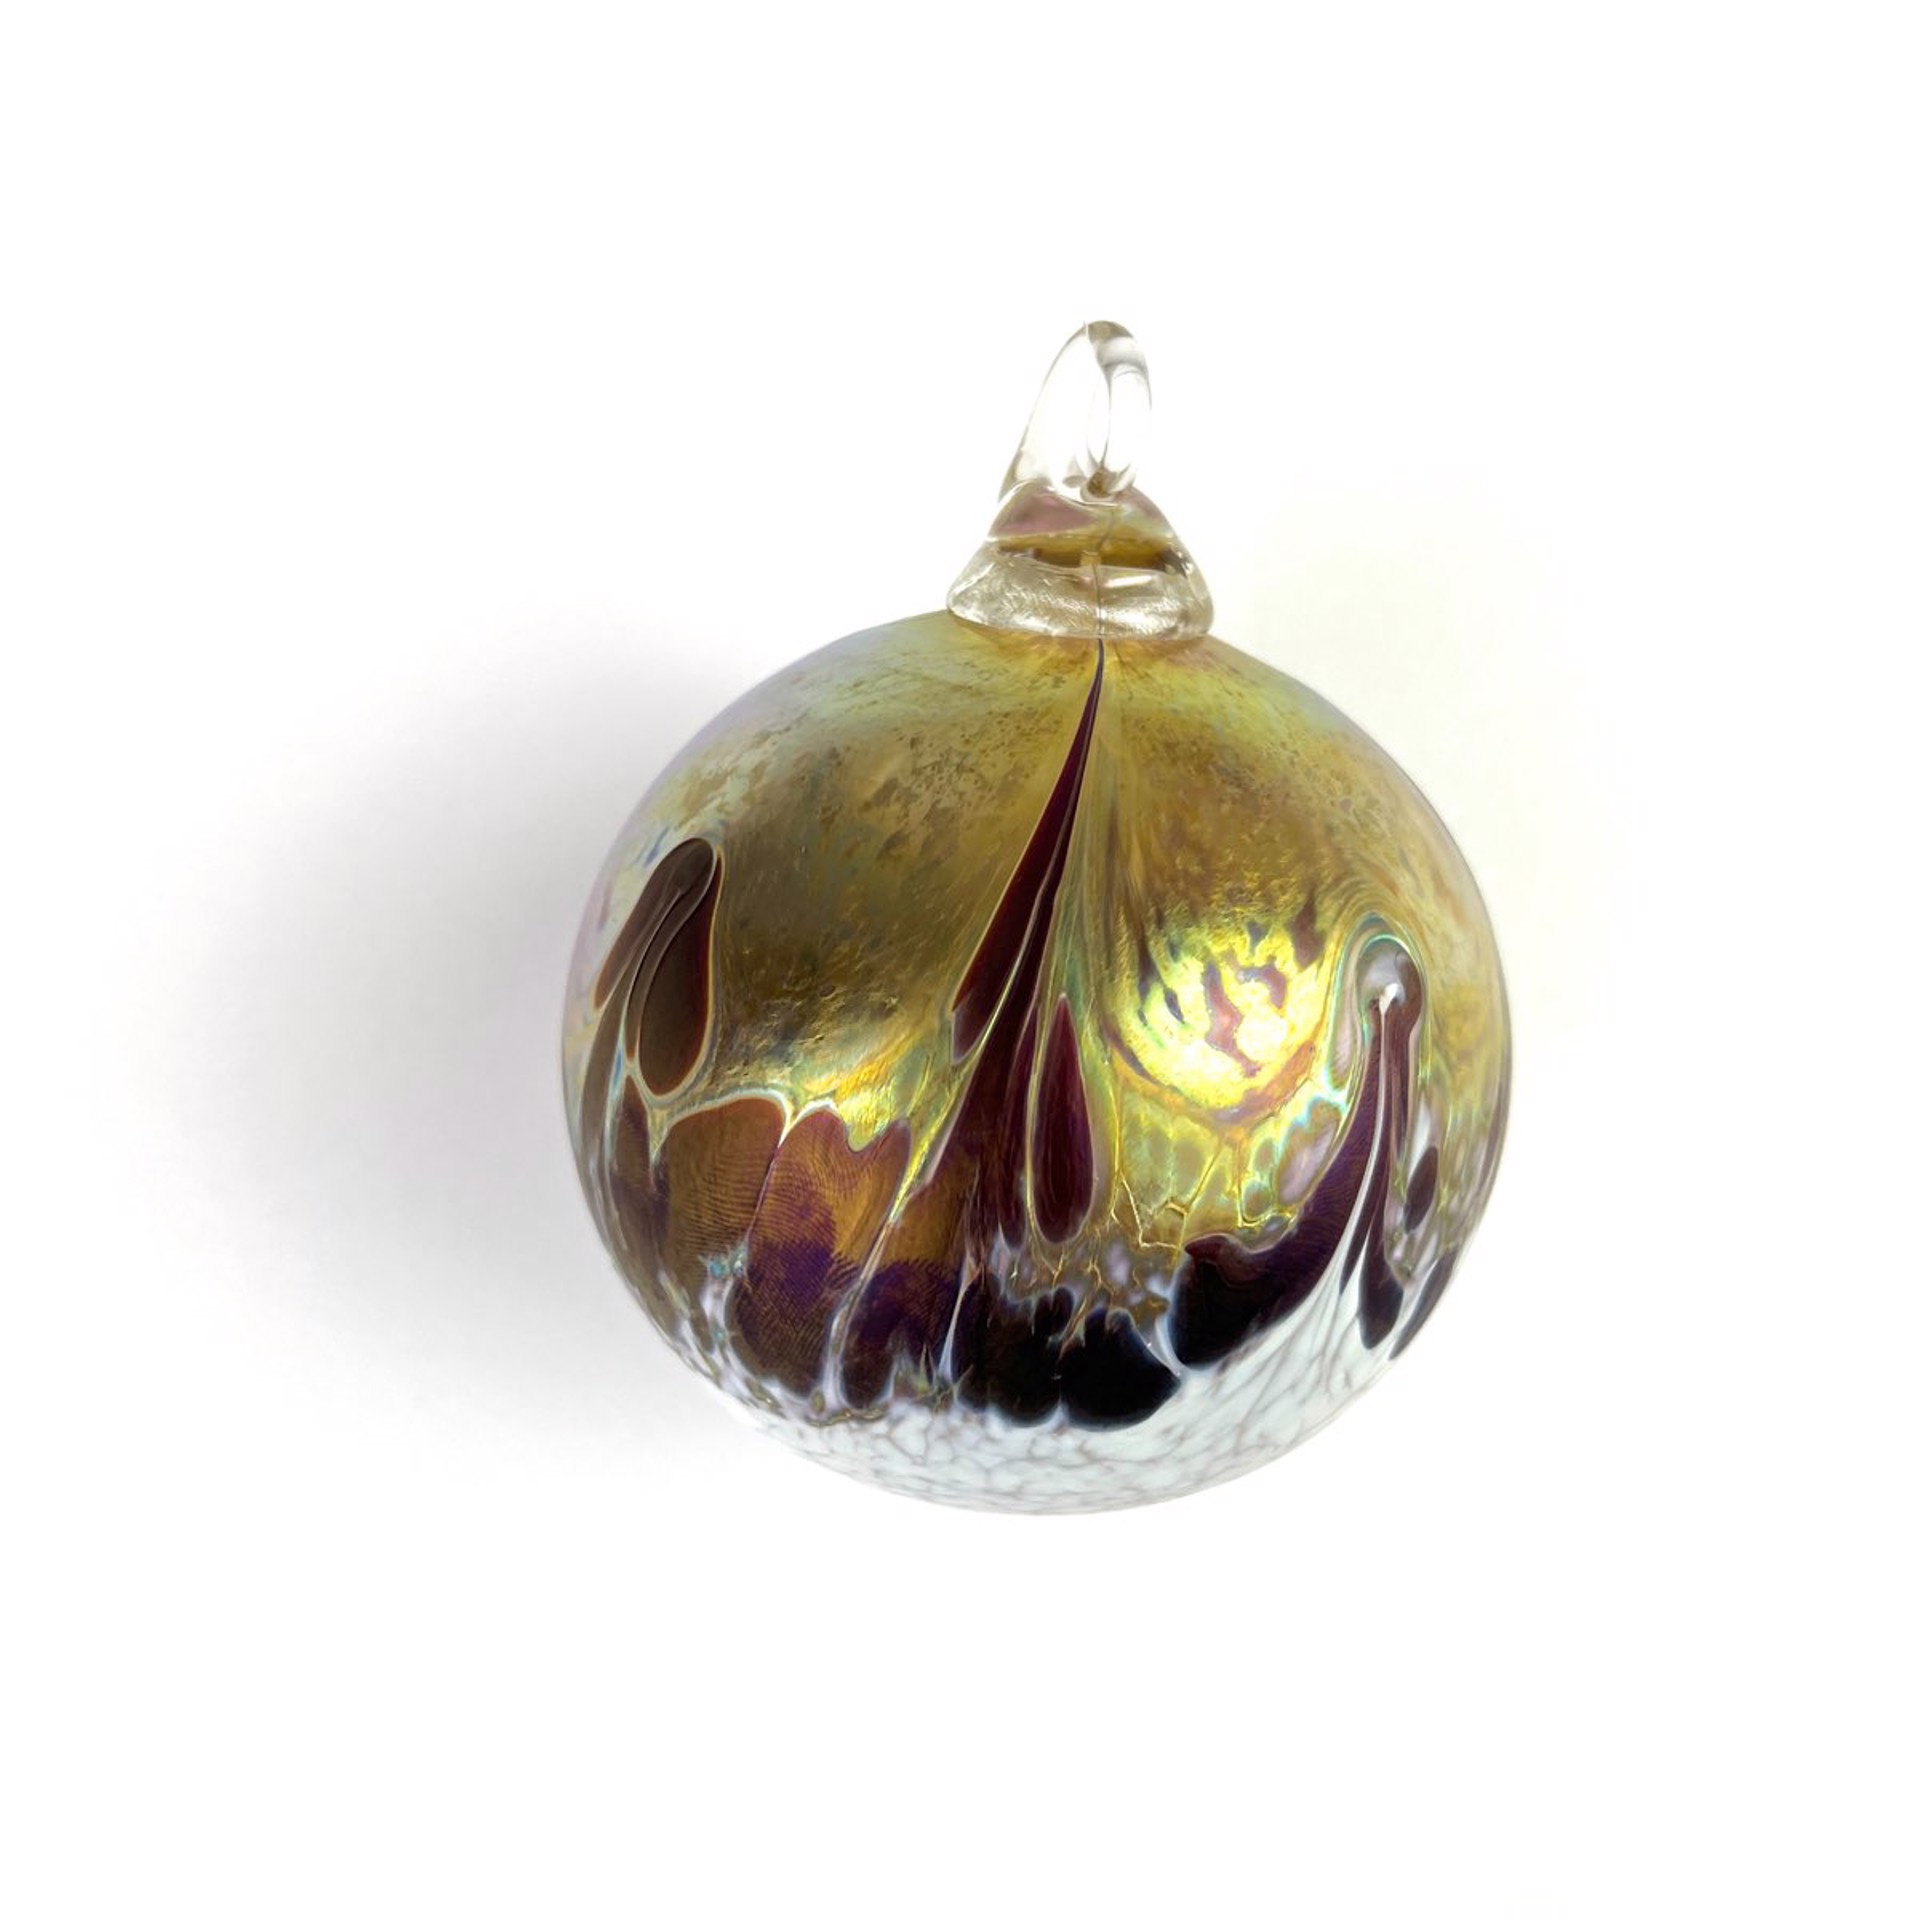 Artisan Cranberries and Cream Ornament by Furnace Glass